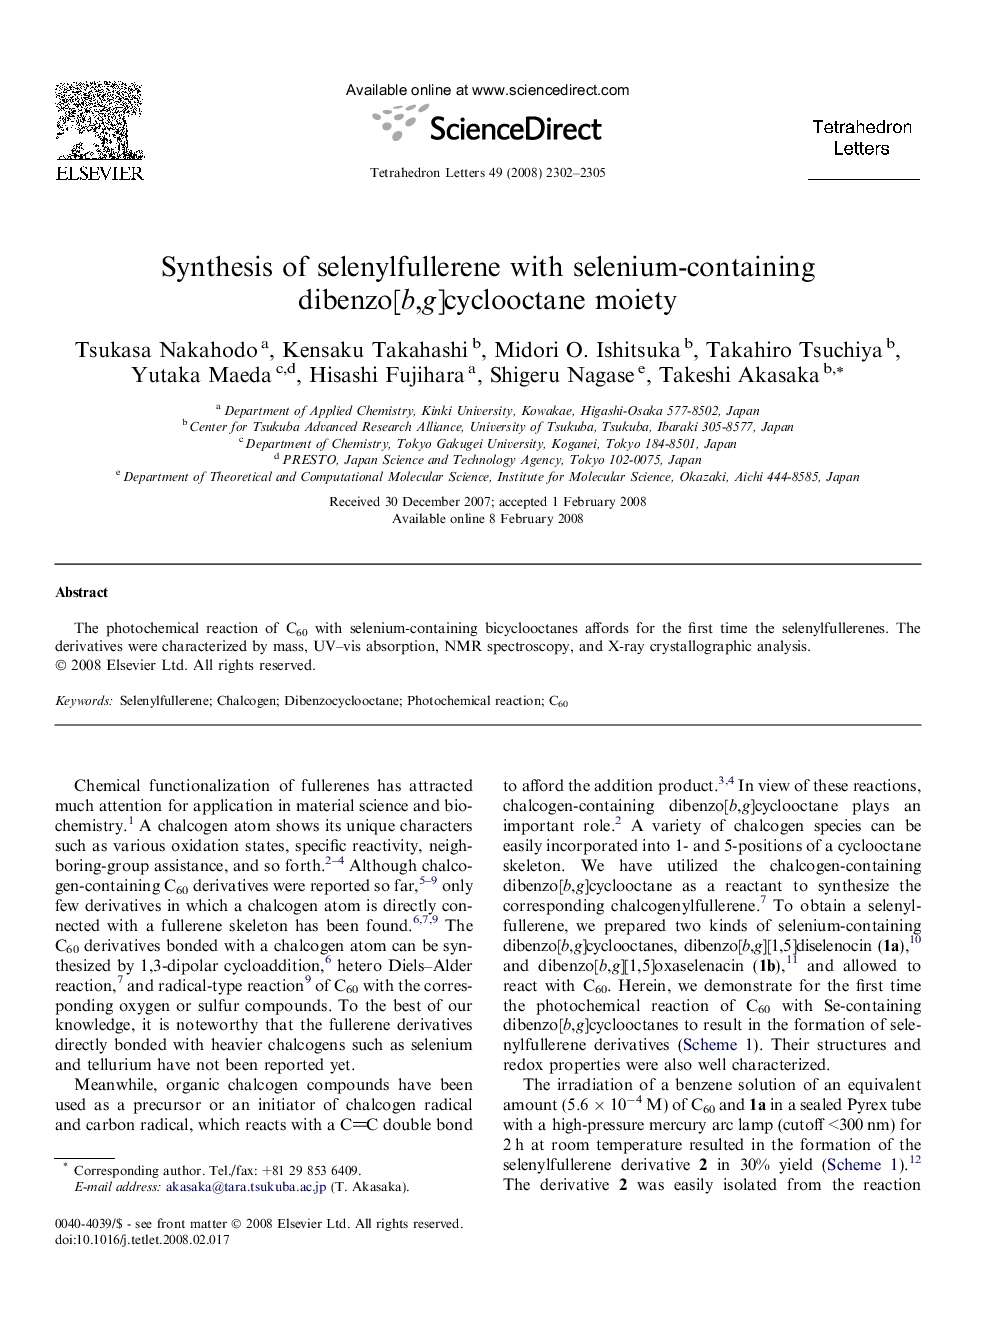 Synthesis of selenylfullerene with selenium-containing dibenzo[b,g]cyclooctane moiety